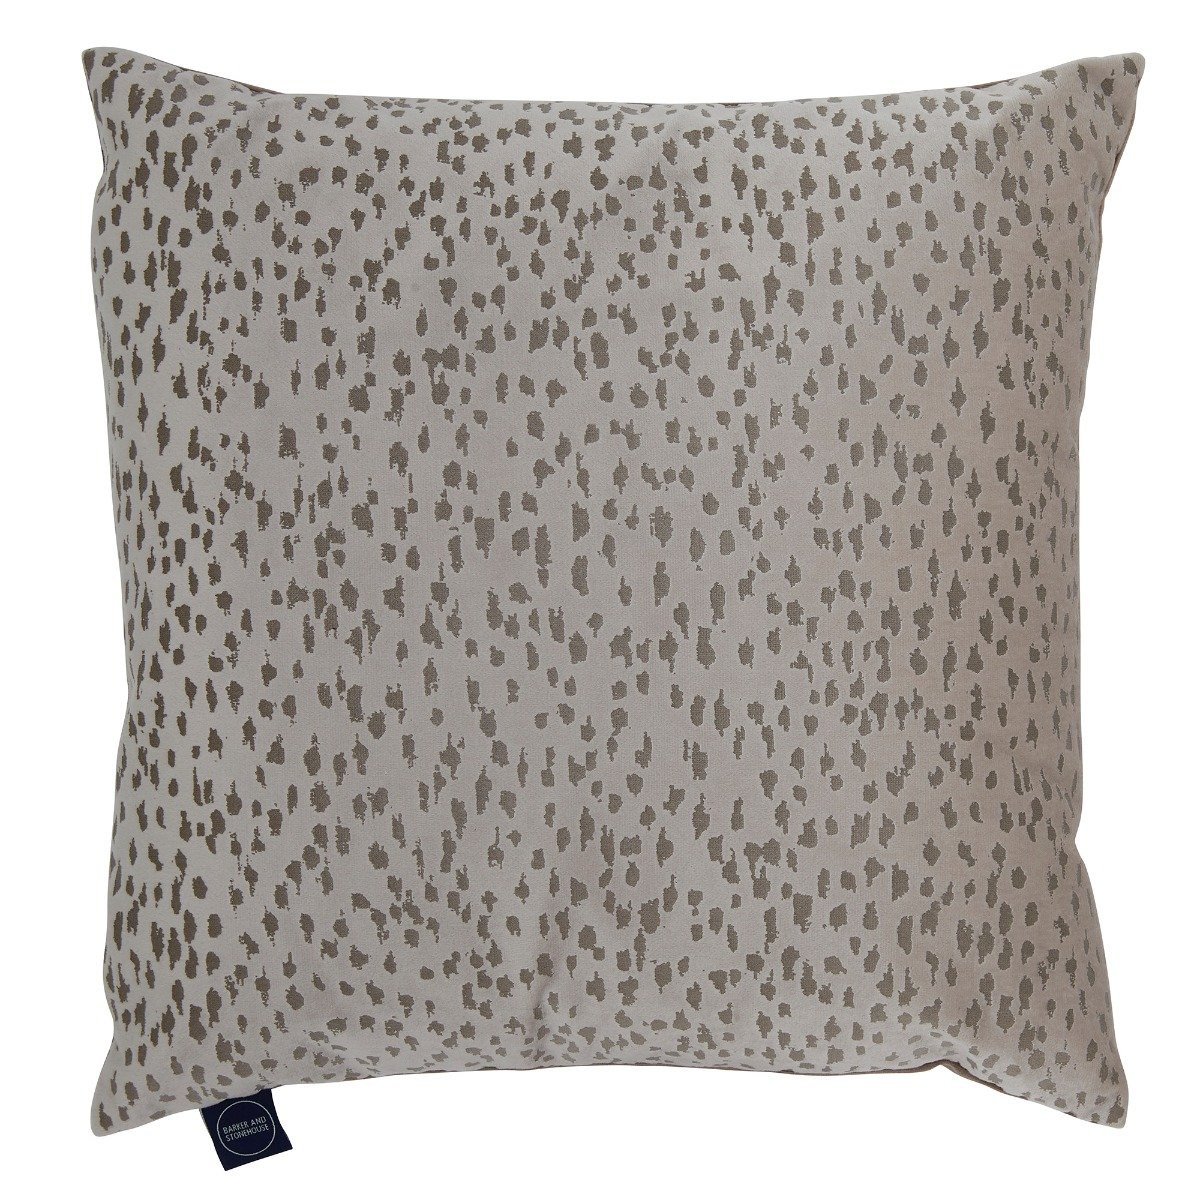 Staris Taupe Cushion, Square Fabric | Barker & Stonehouse